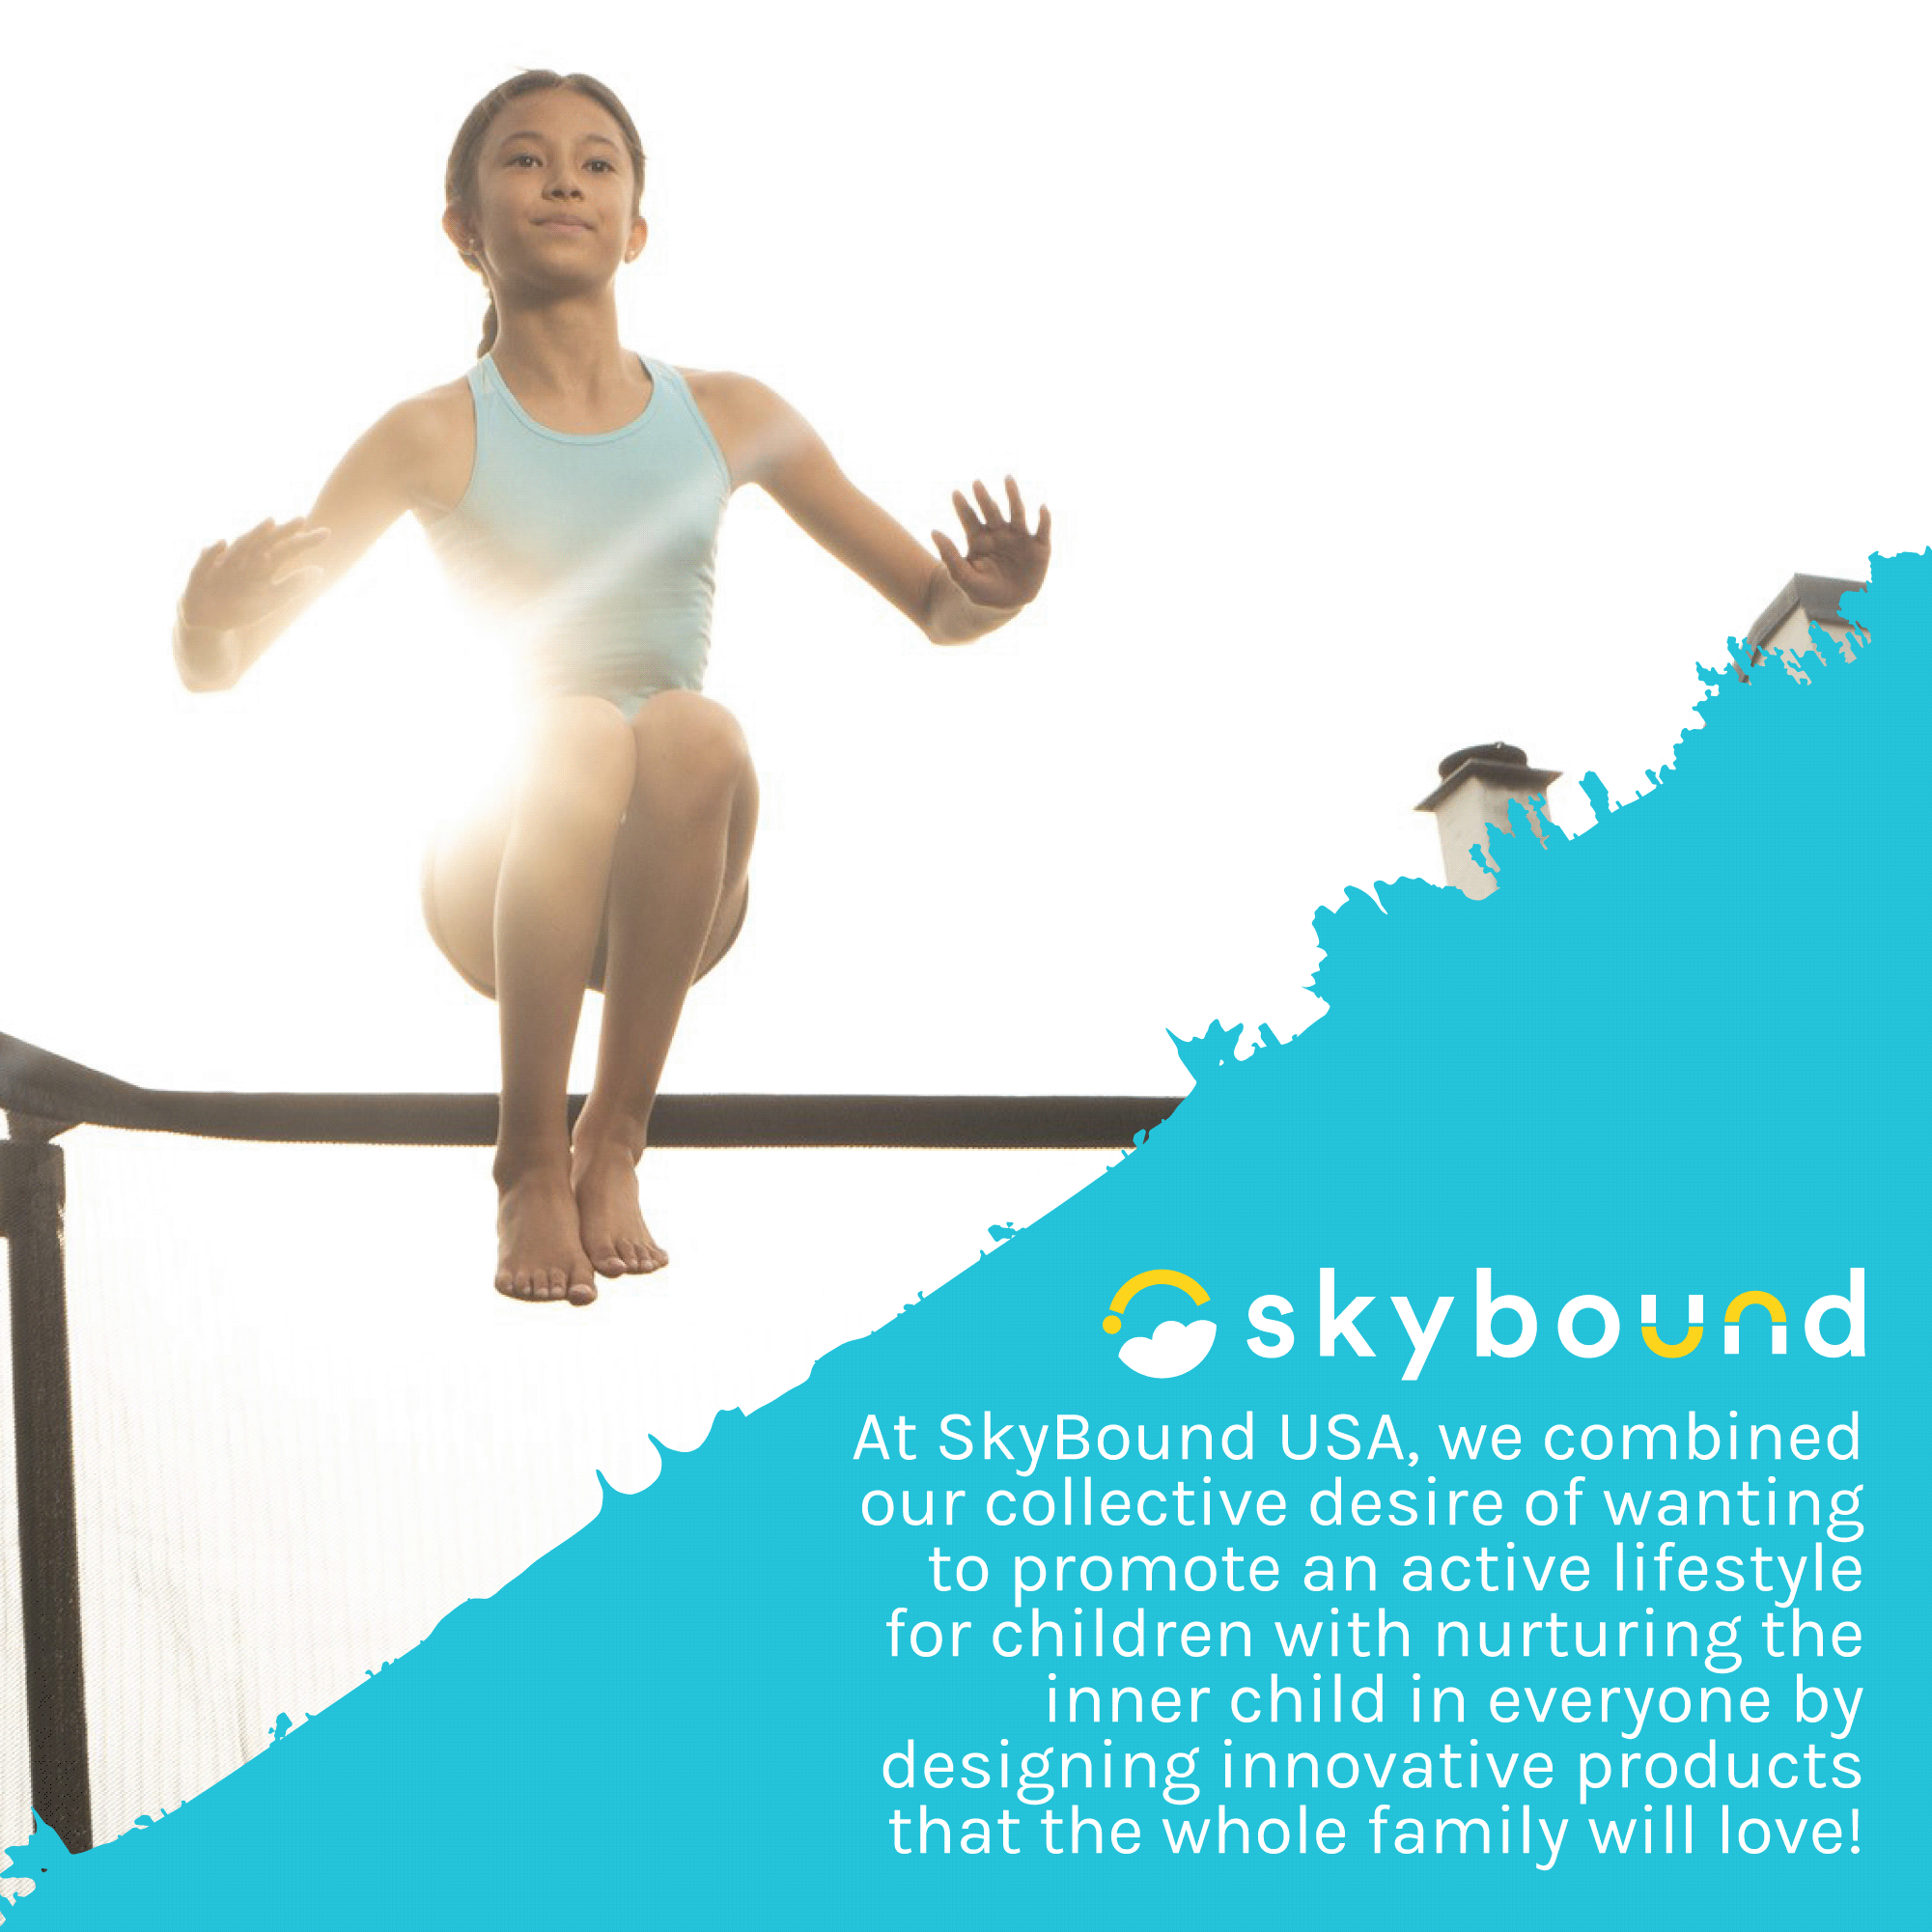 SkyBound: At SkyBound USA, we combined our collective desire of wanting to promote an active lifestyle for children with nurturing the inner child in everyone by designing innovative products that the whole family will love!